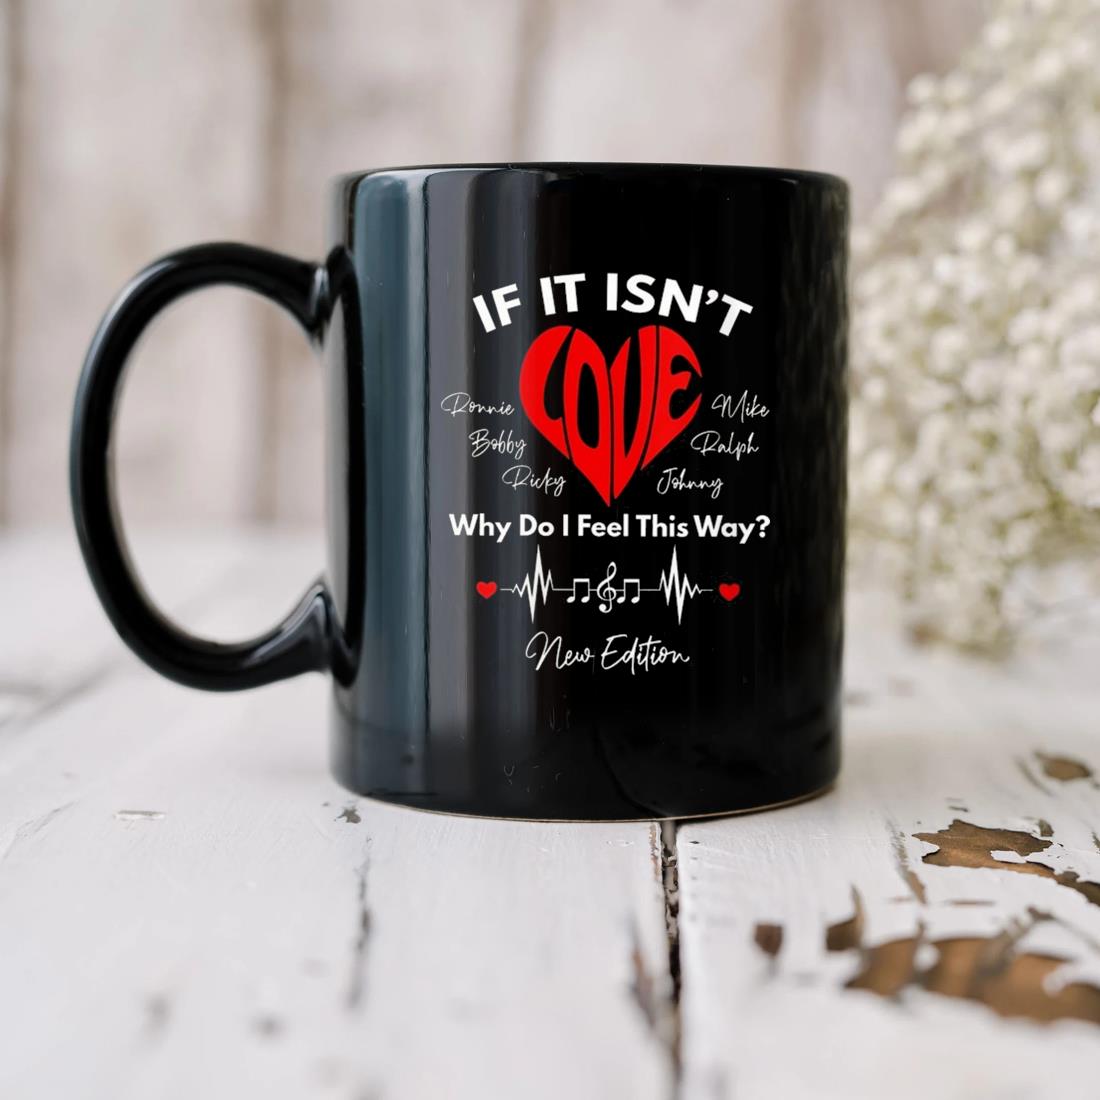 If It Isn't Love Why Do I Feel This Way Ronnie Bobby Ricky Mike Ralph And Johnny New Edition 2023 Mug